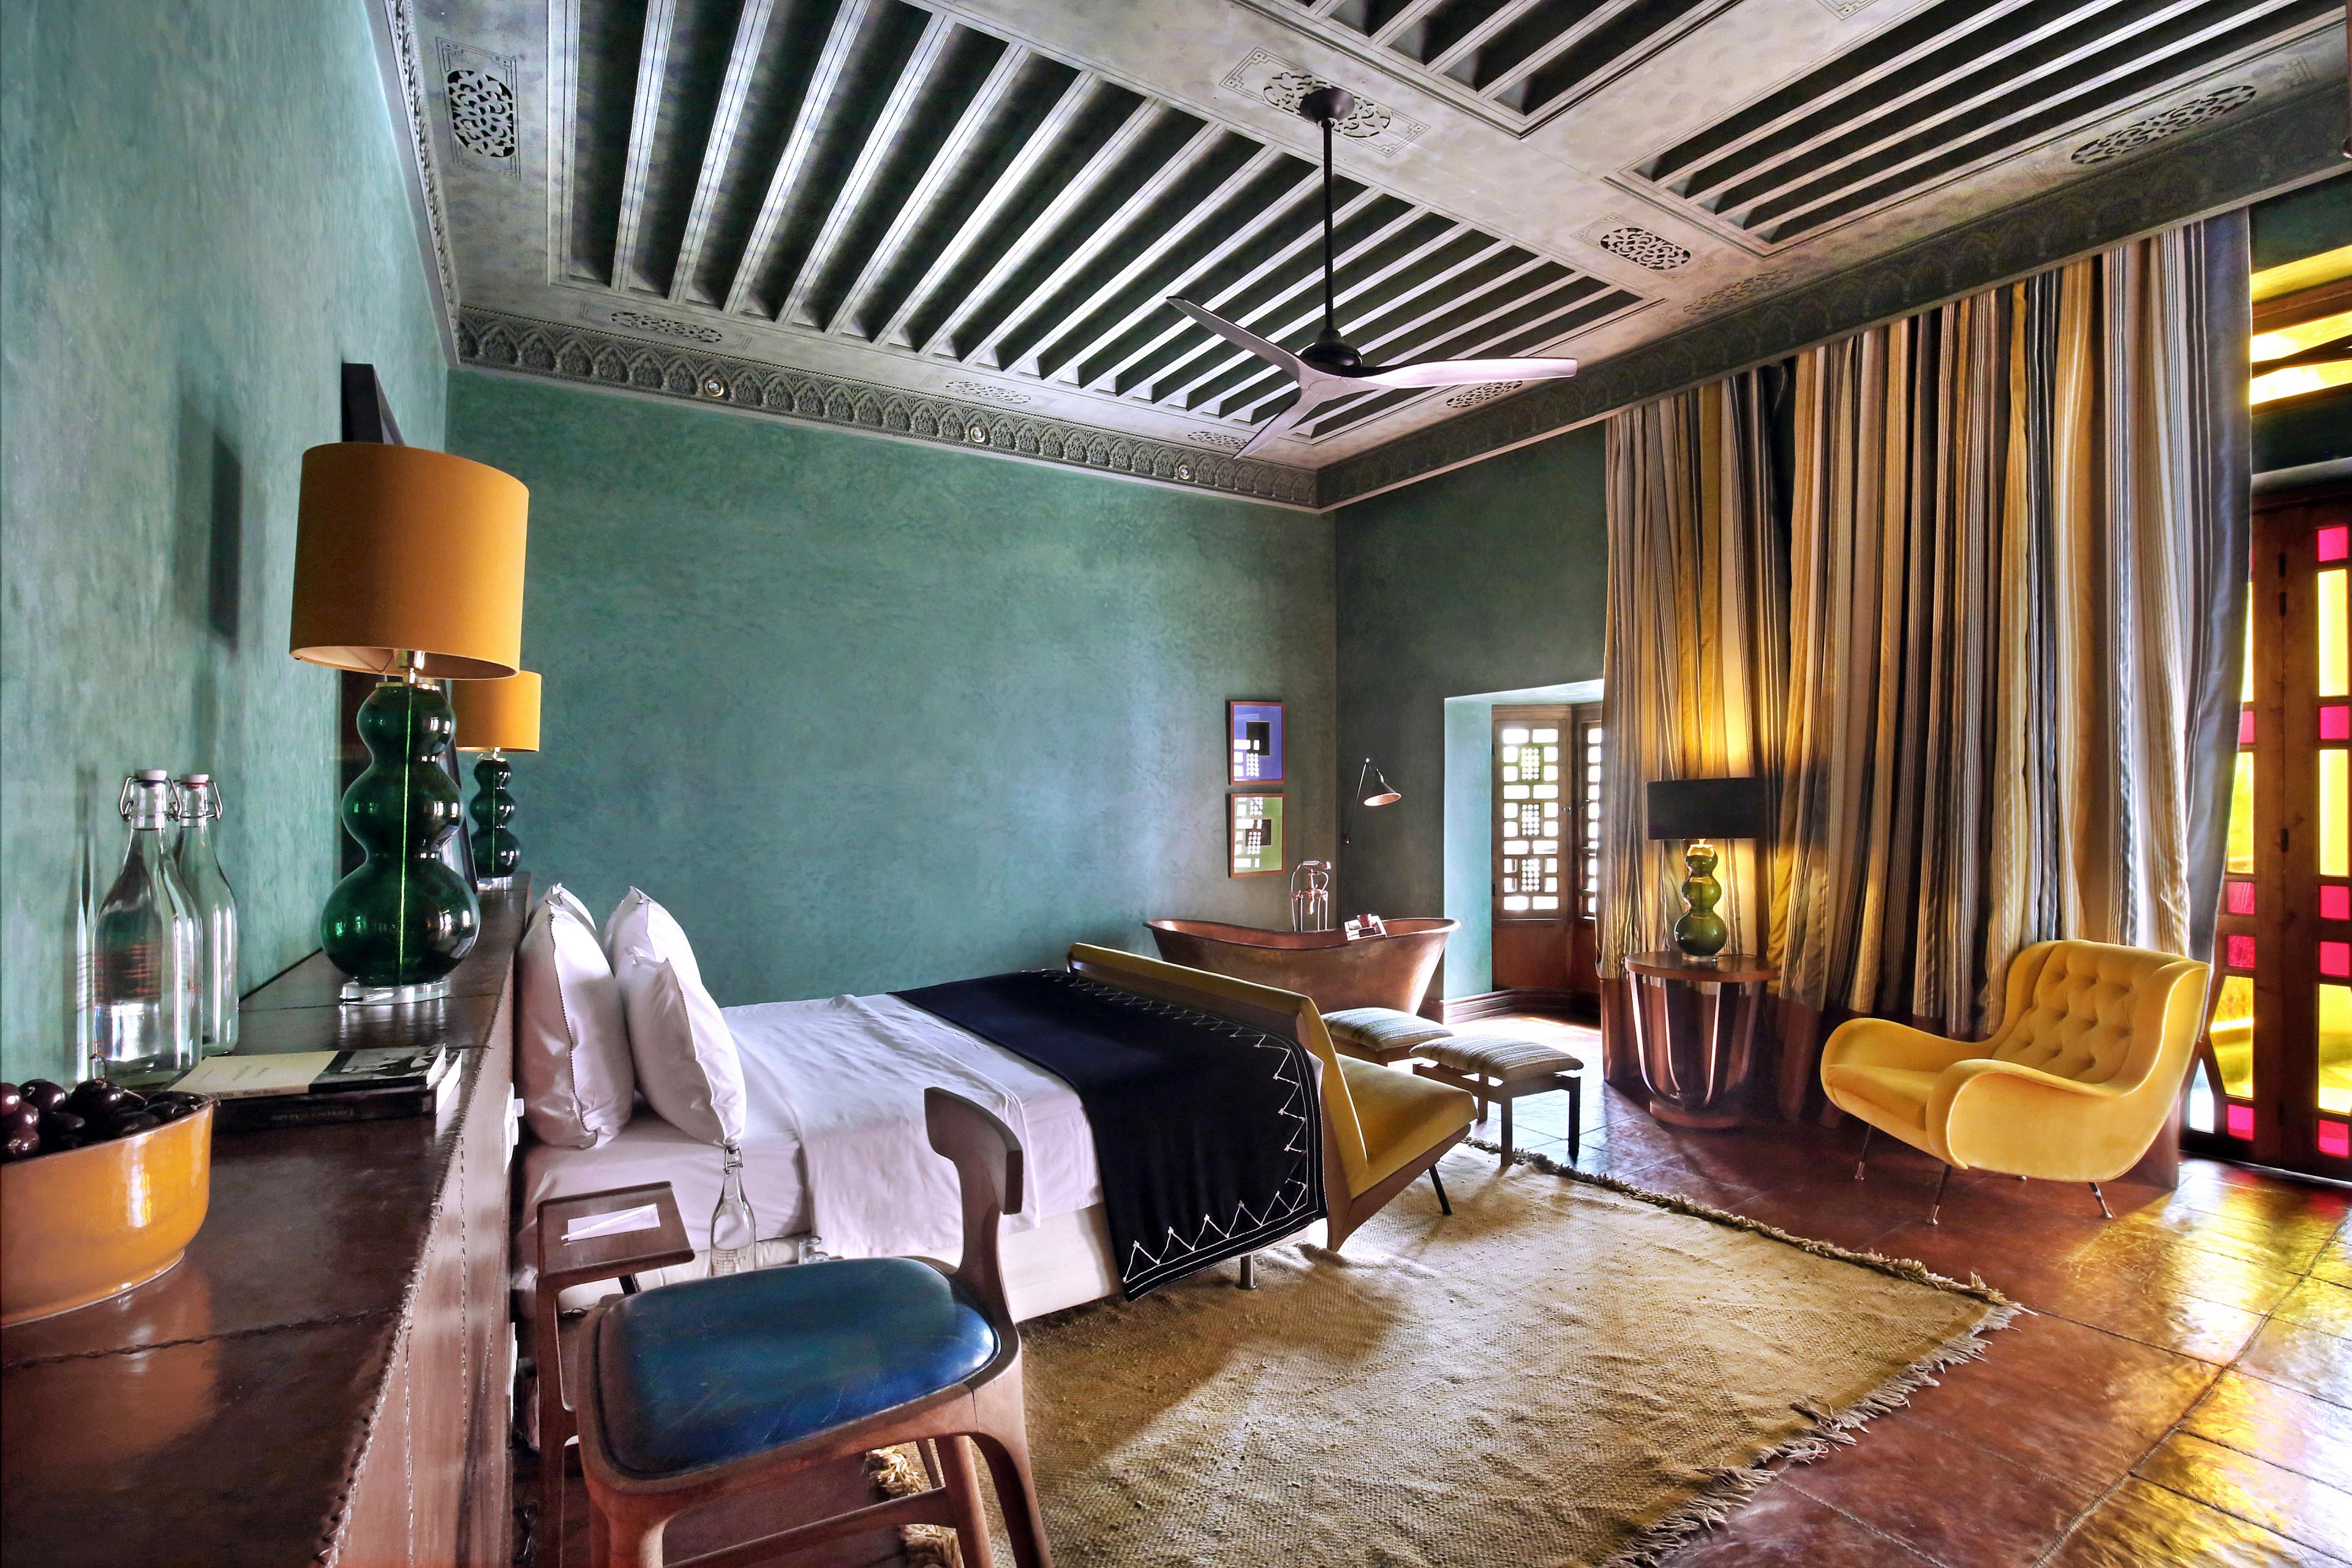 hotel room with wooden ceiling, green painted walls, terra cotta floor and a bed facing stained glass french doorway. there is a yellow chair and matching yellow lampshades on two lamps above bed